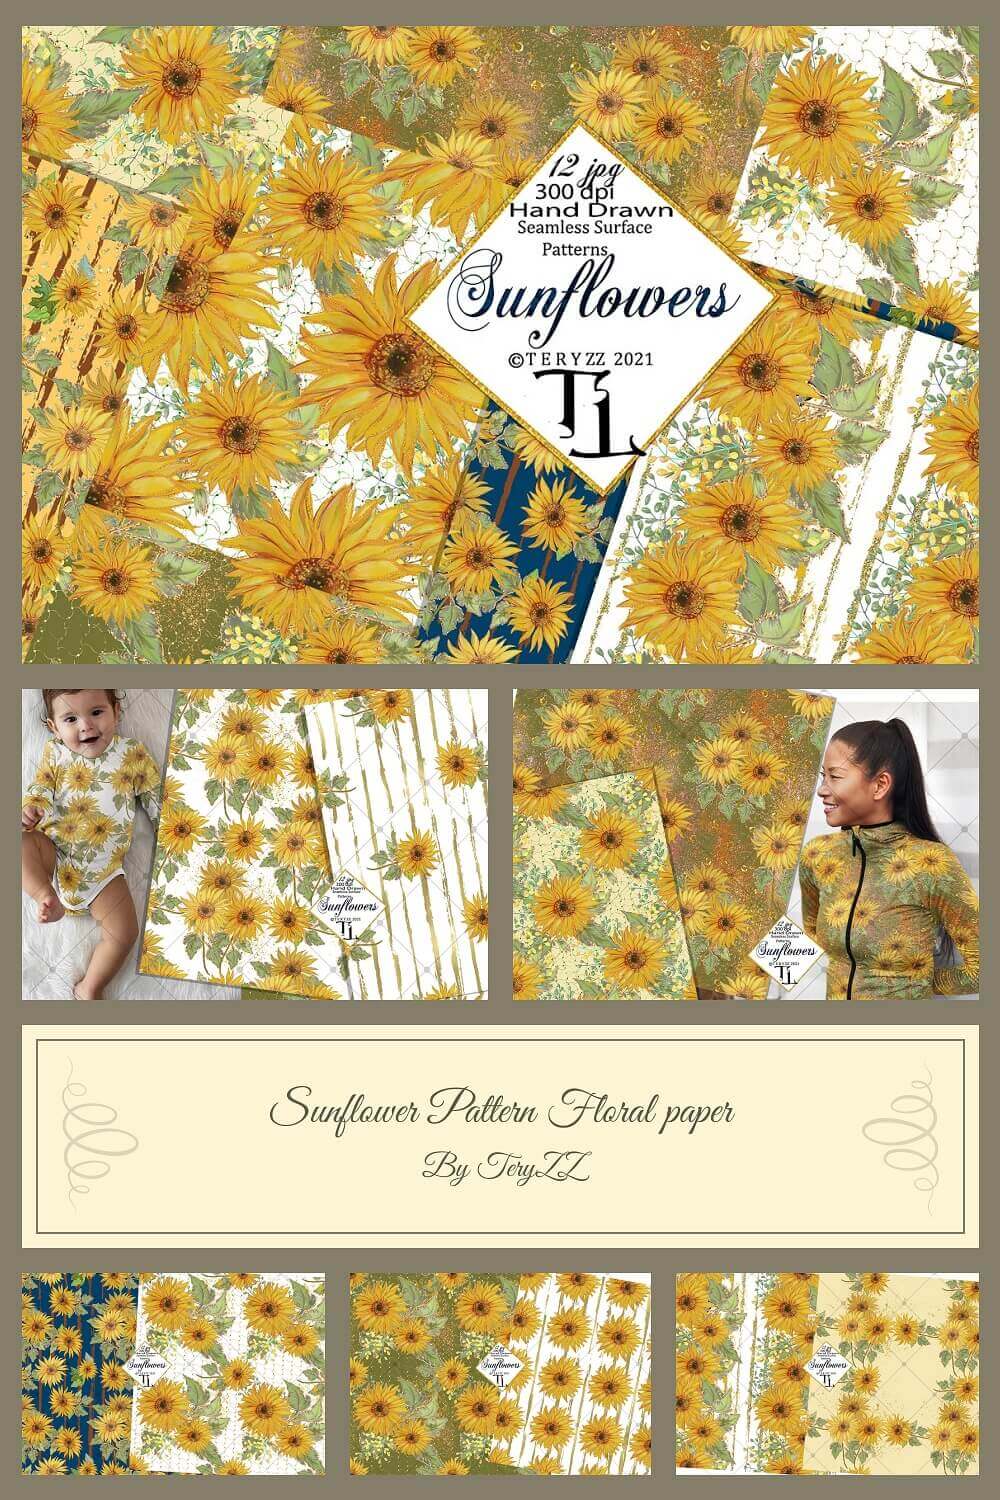 Six seamless patterns with sunflowers in different sizes.